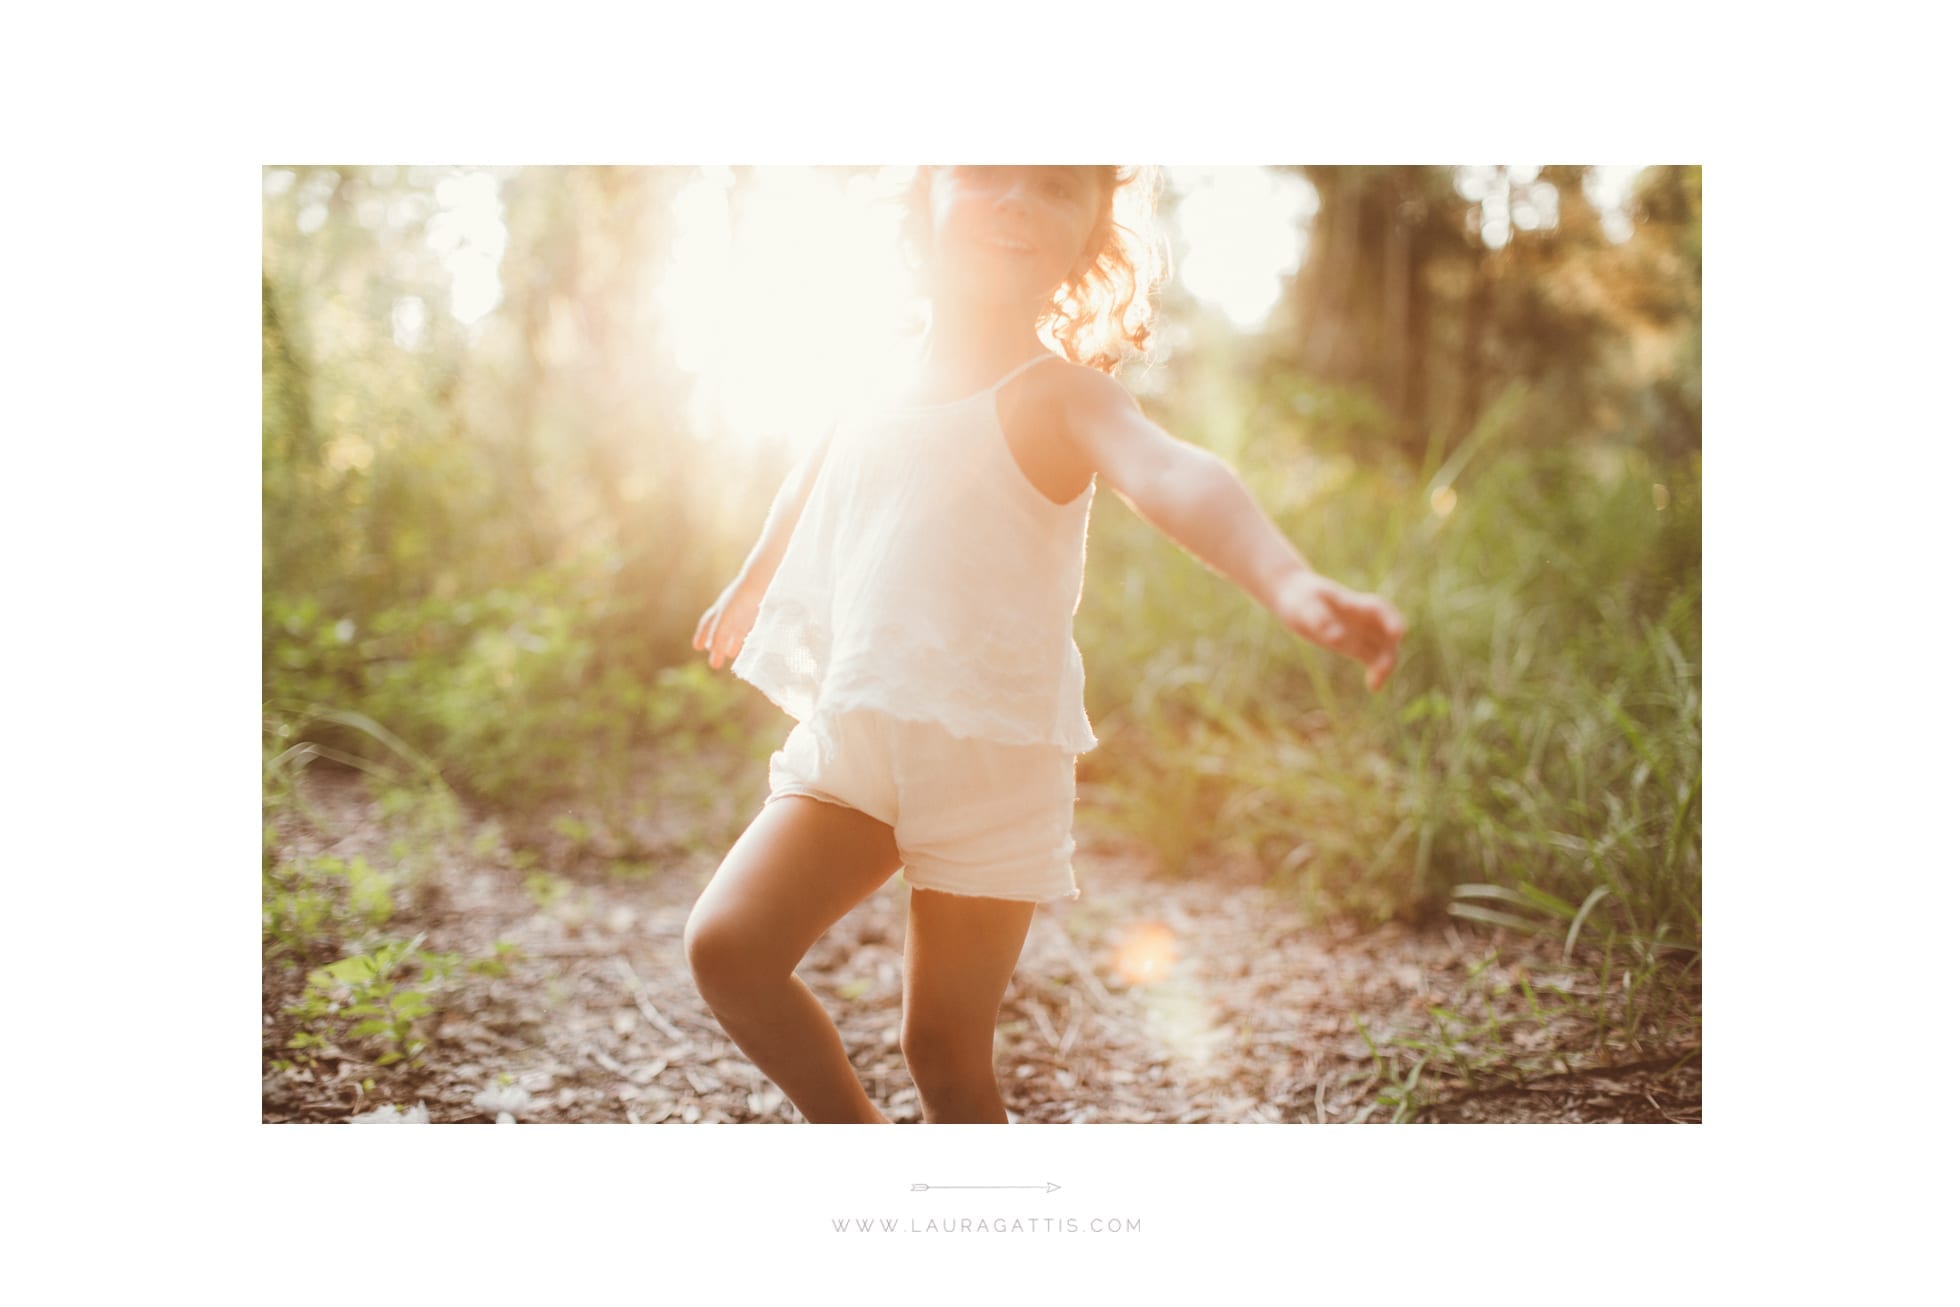 film style family photography | laura gattis photography